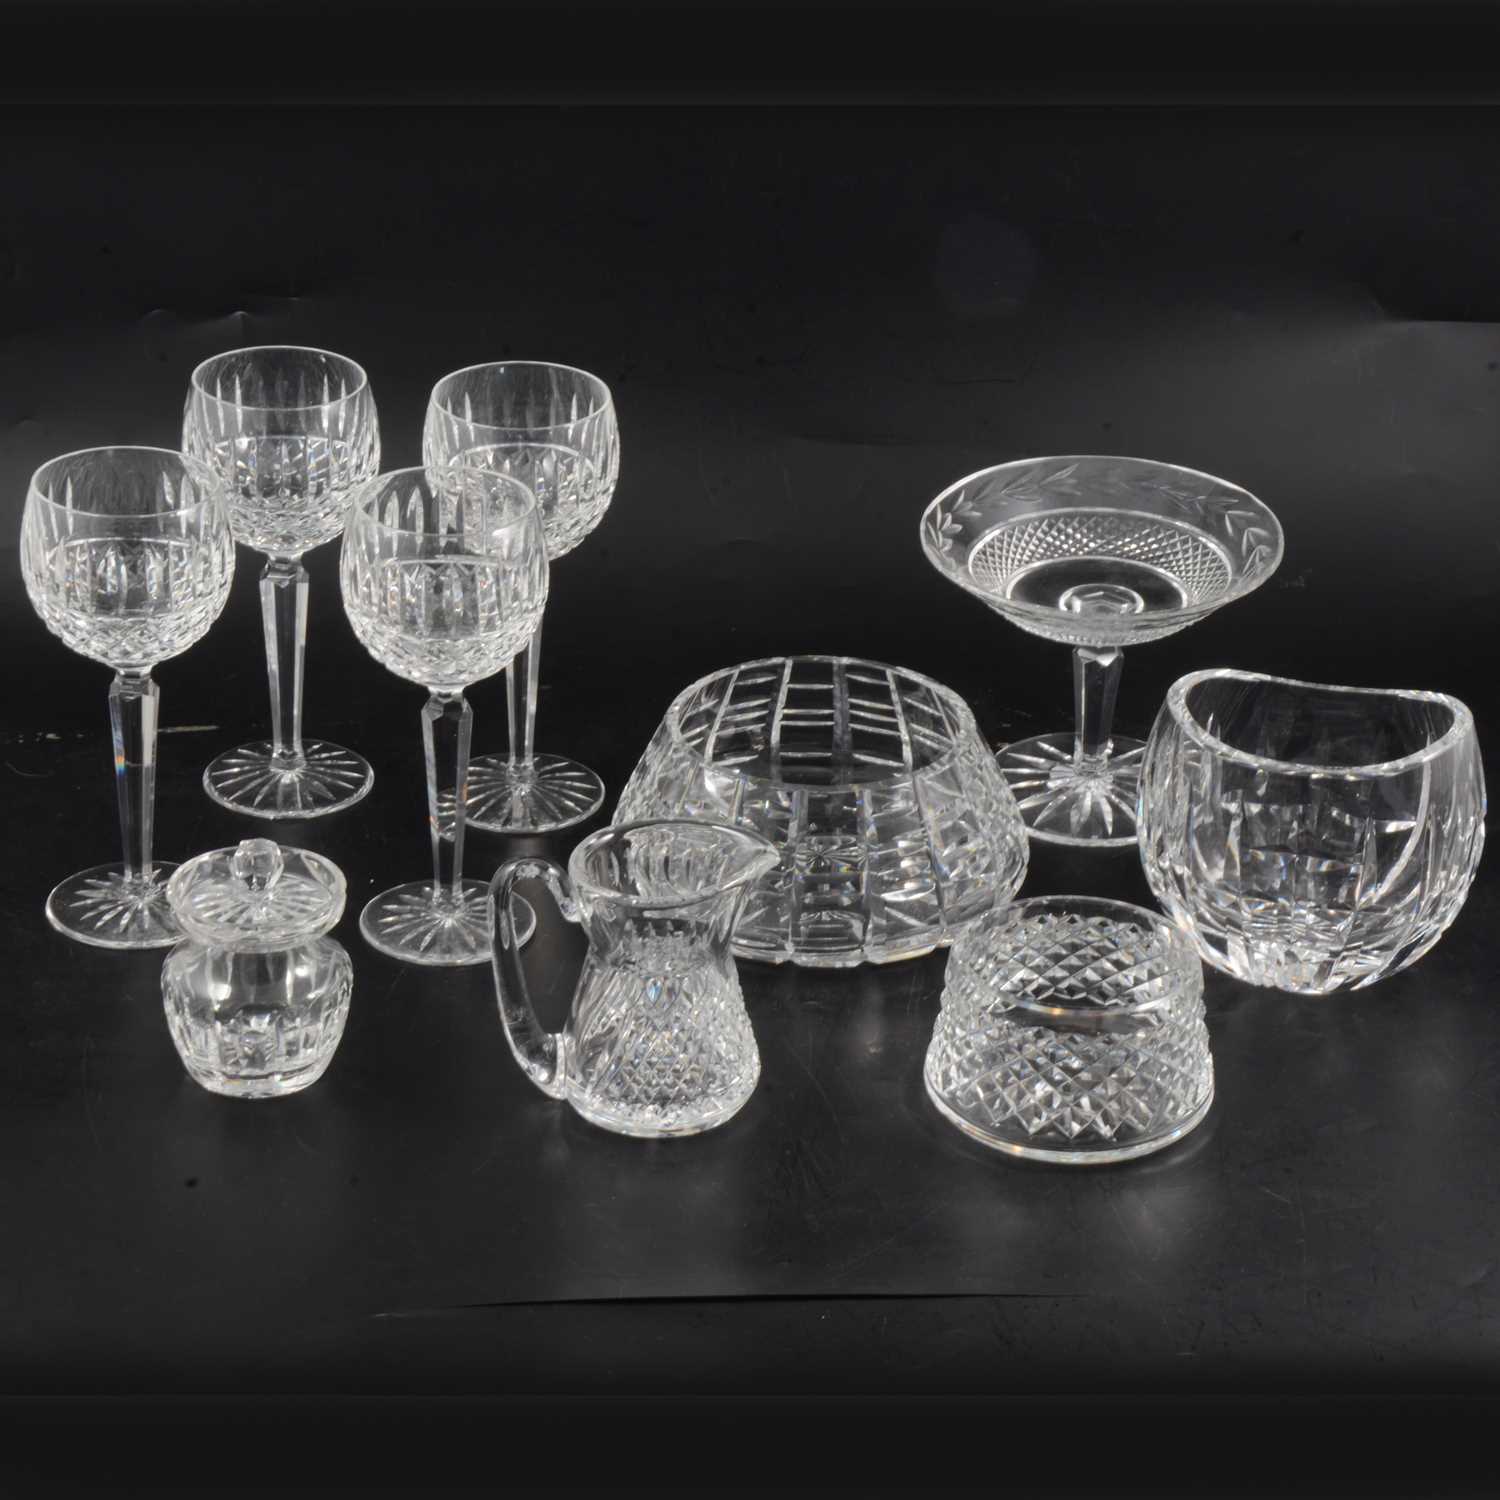 Lot 48 - Waterford Crystal 'Tramore' pattern hock glasses, sherry glasses, tumblers and other items.